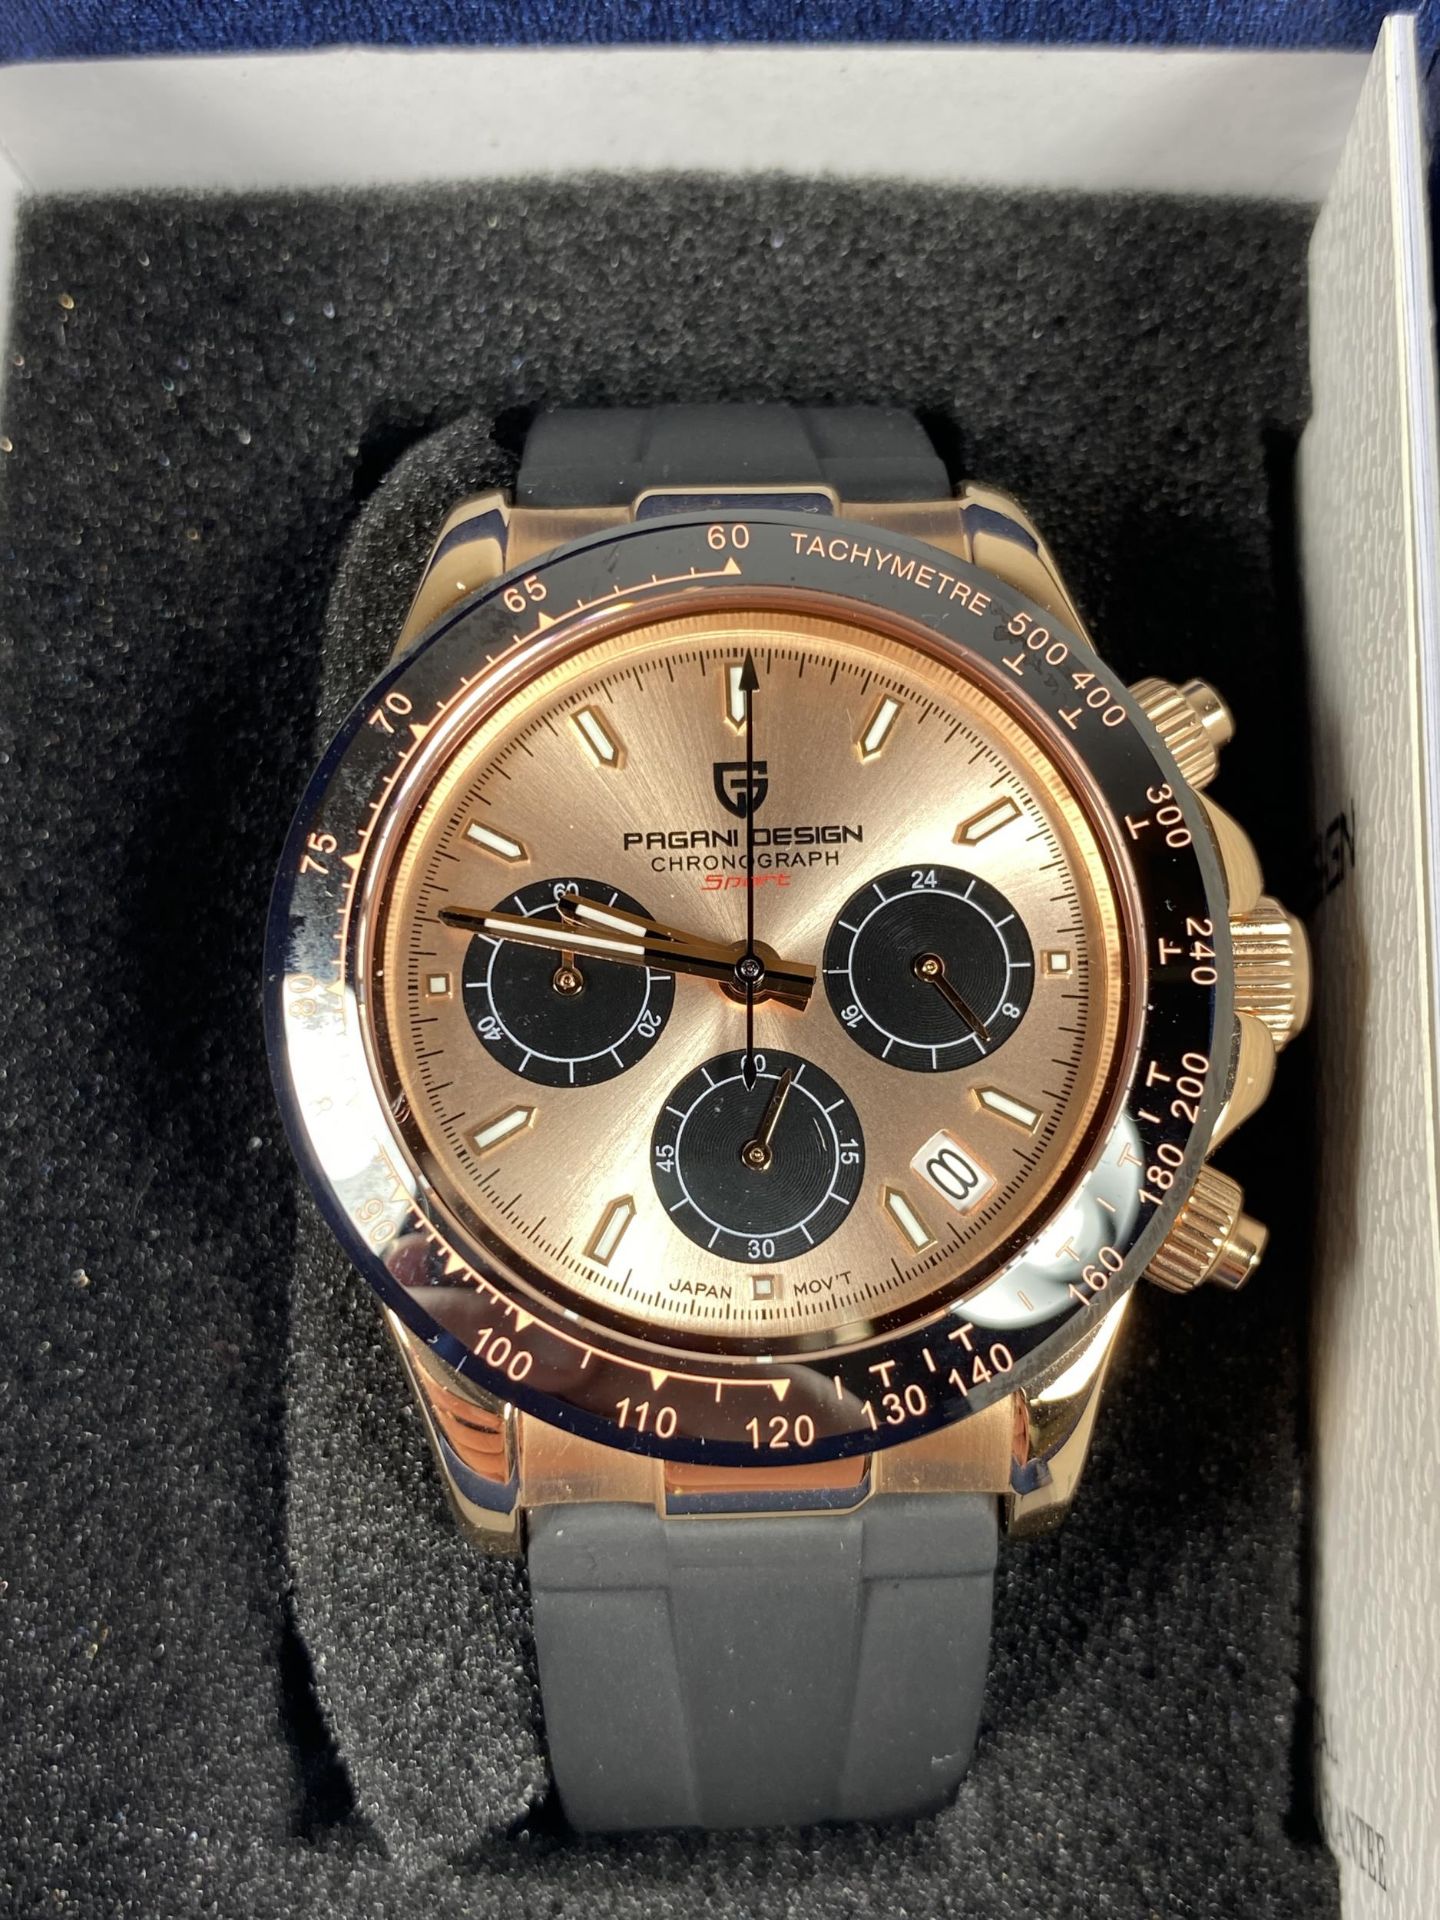 A BOXED PAGANI DESIGN WATCH - Image 2 of 2